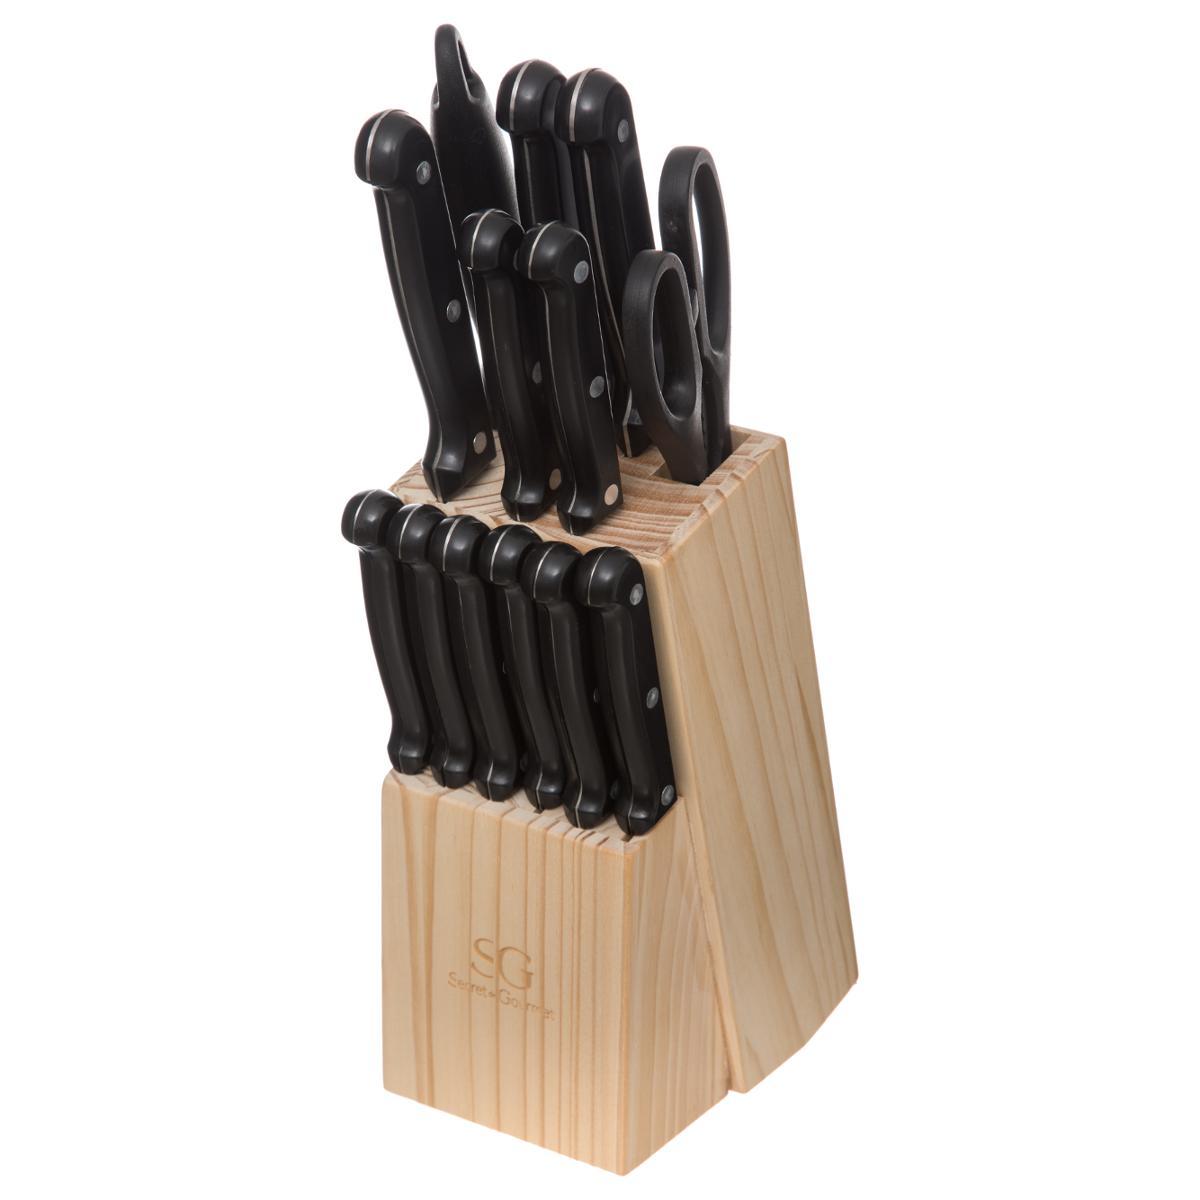 11-knife block with sharpener and scissors - Deco, Furniture for